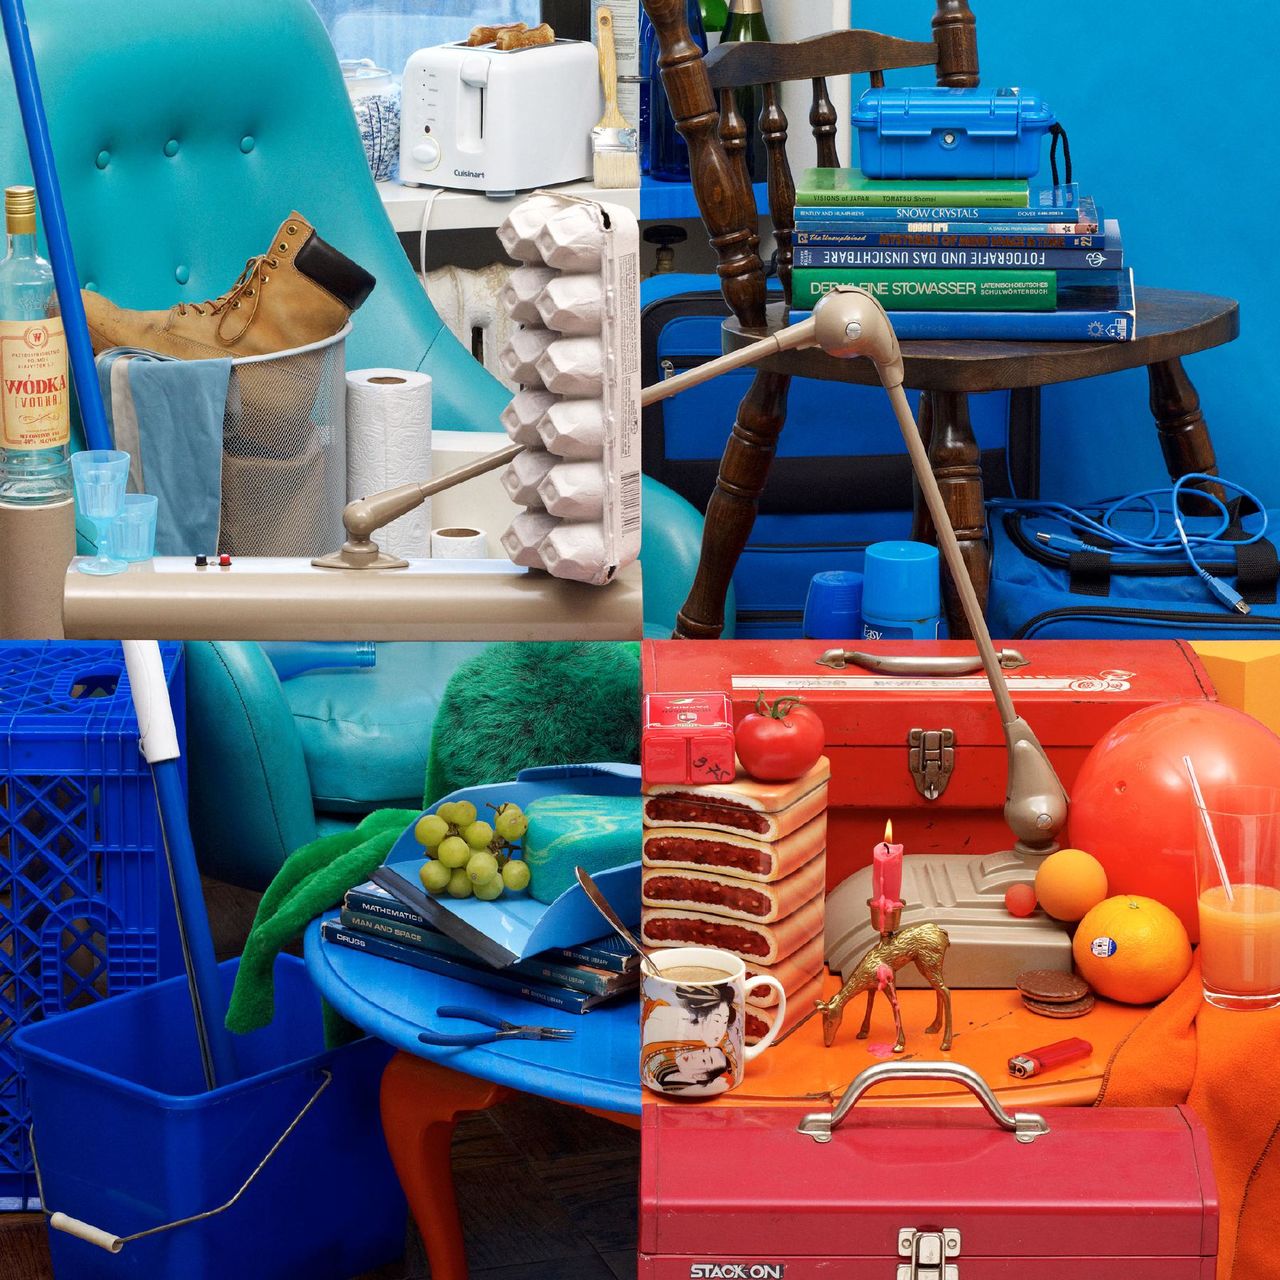 Photographer perfectly aligns Objects to create the Illusion of 4 Separate Images